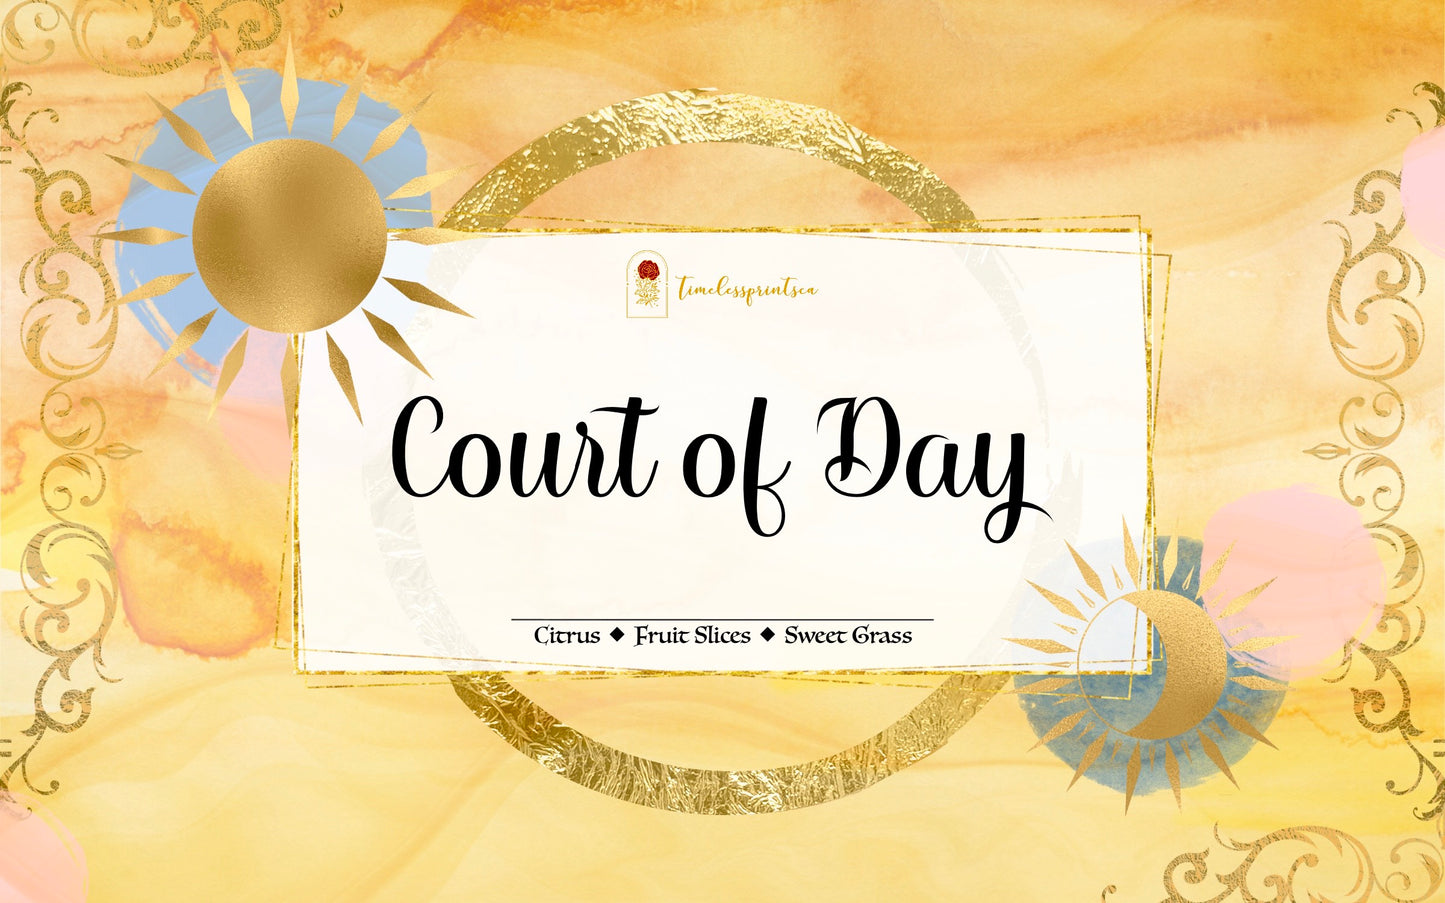 Court of Day